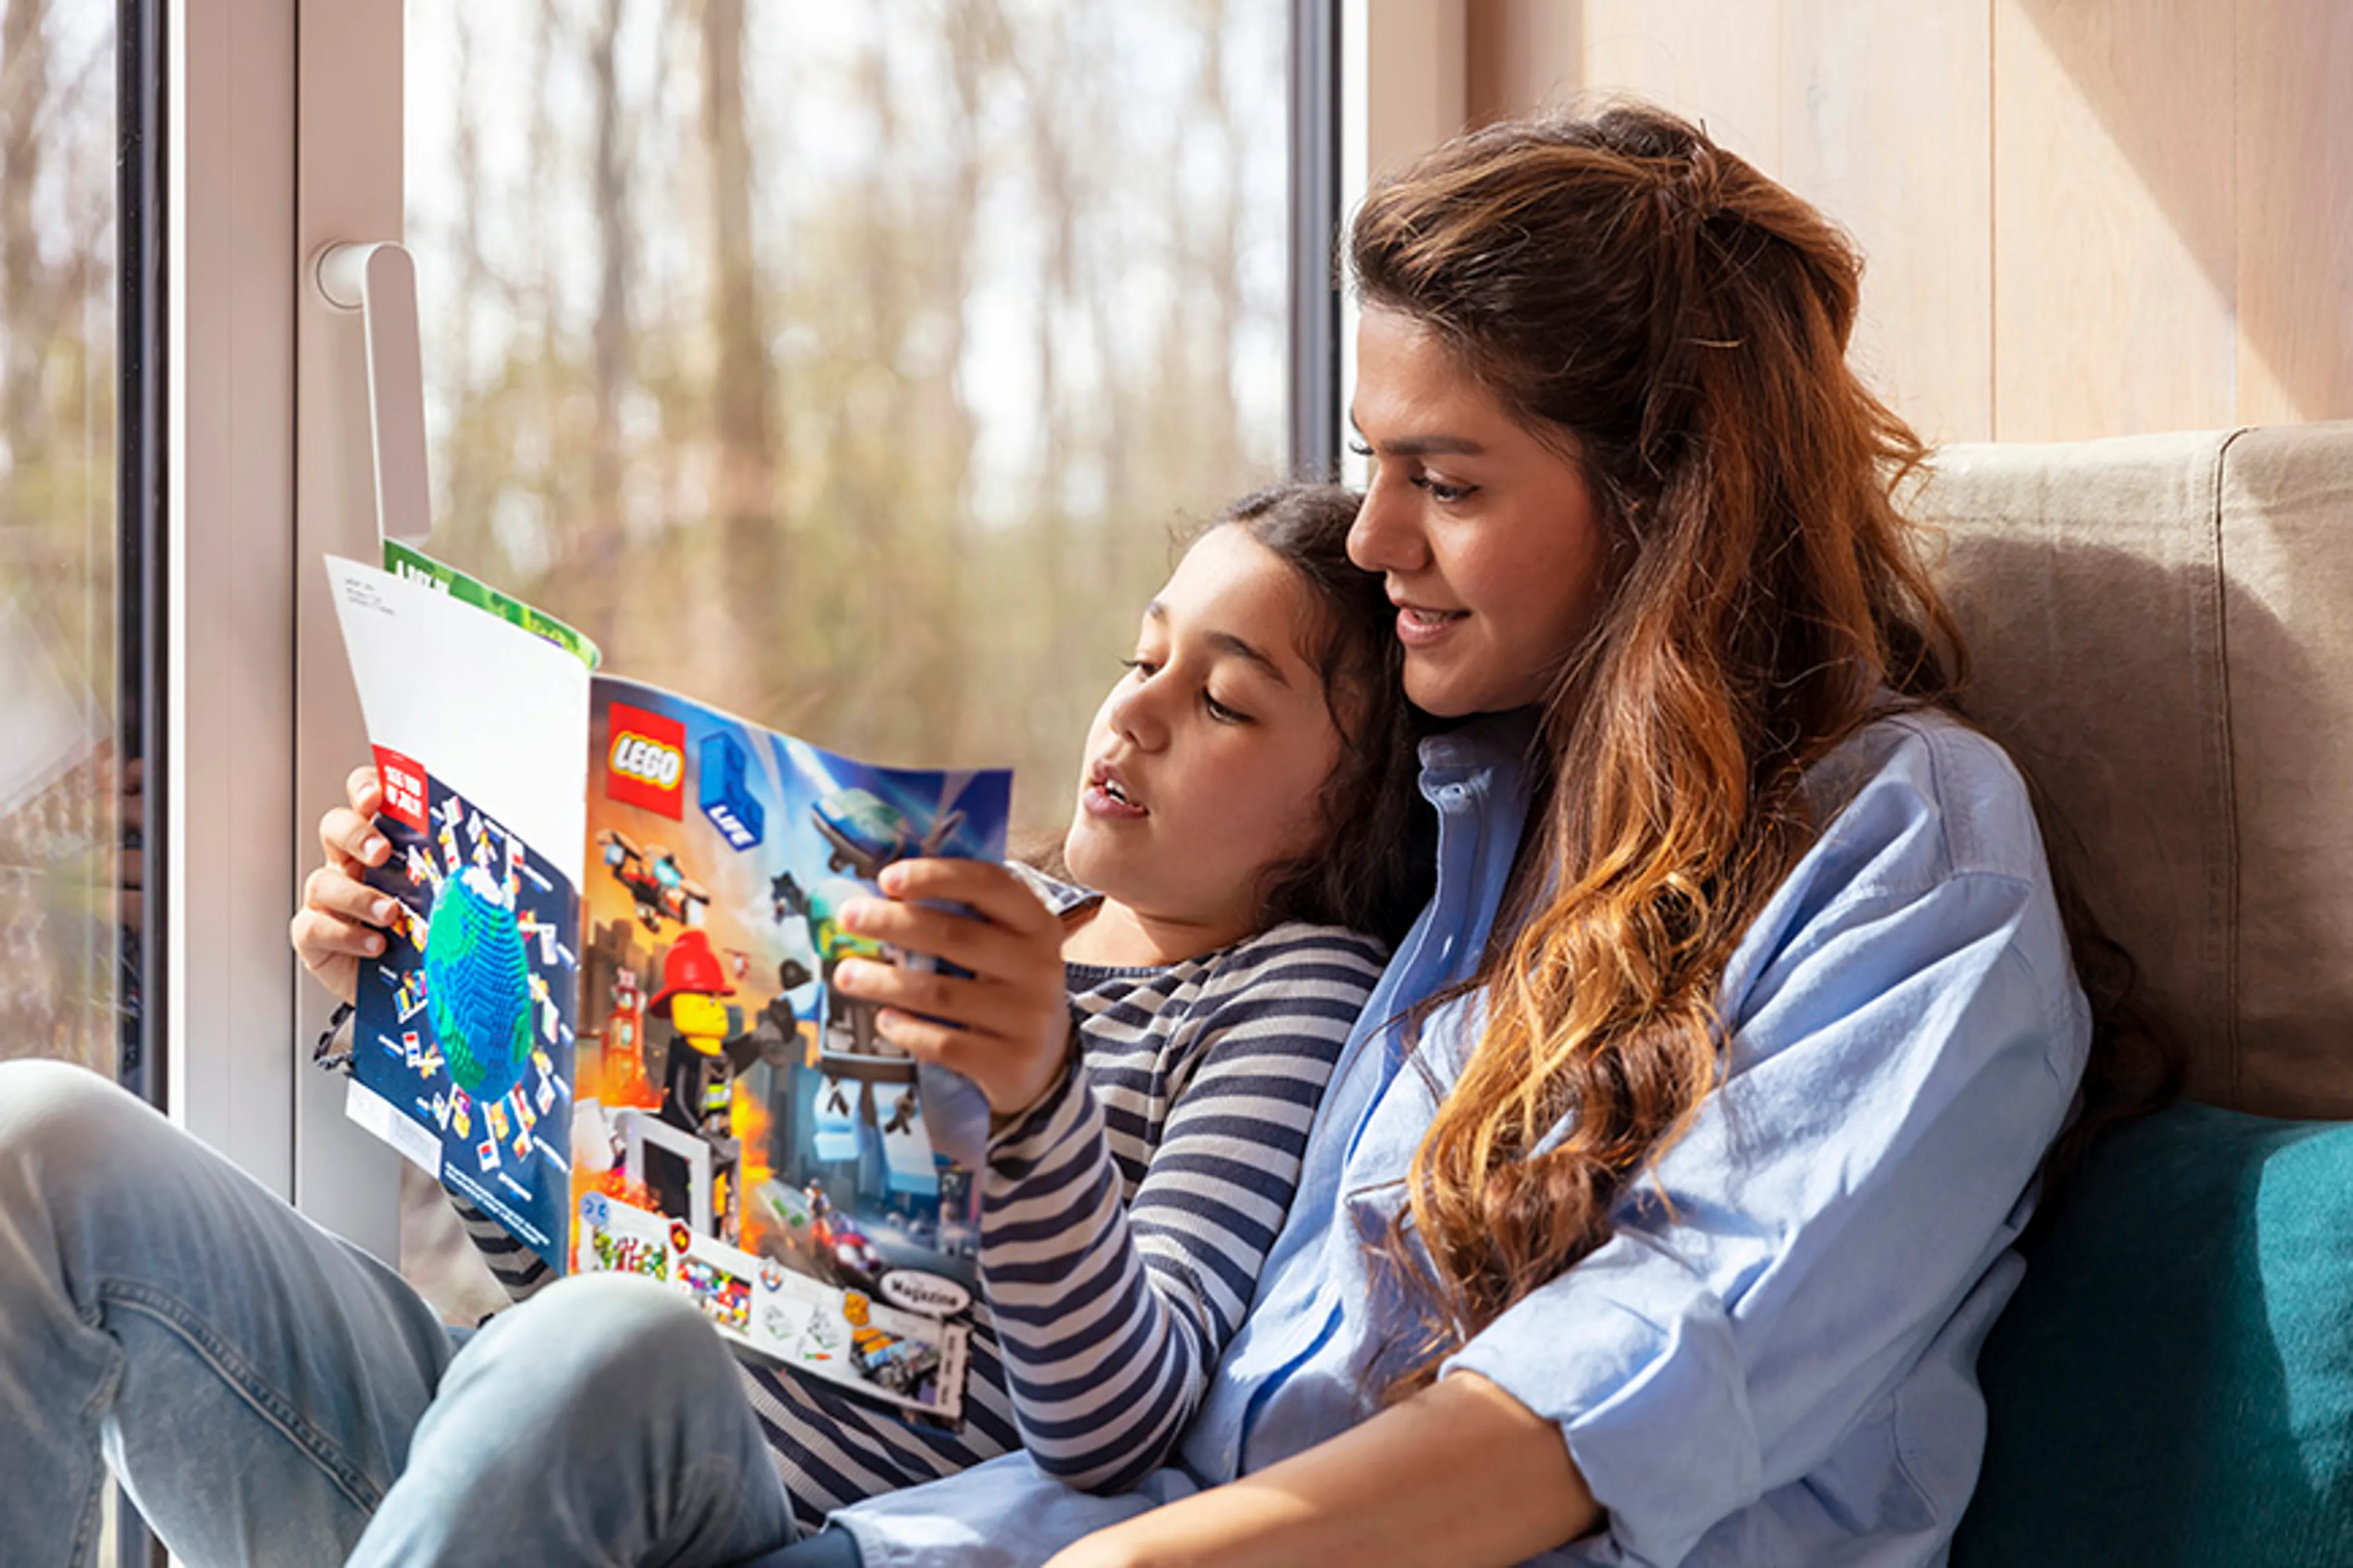 A family read LEGO Life magazine together